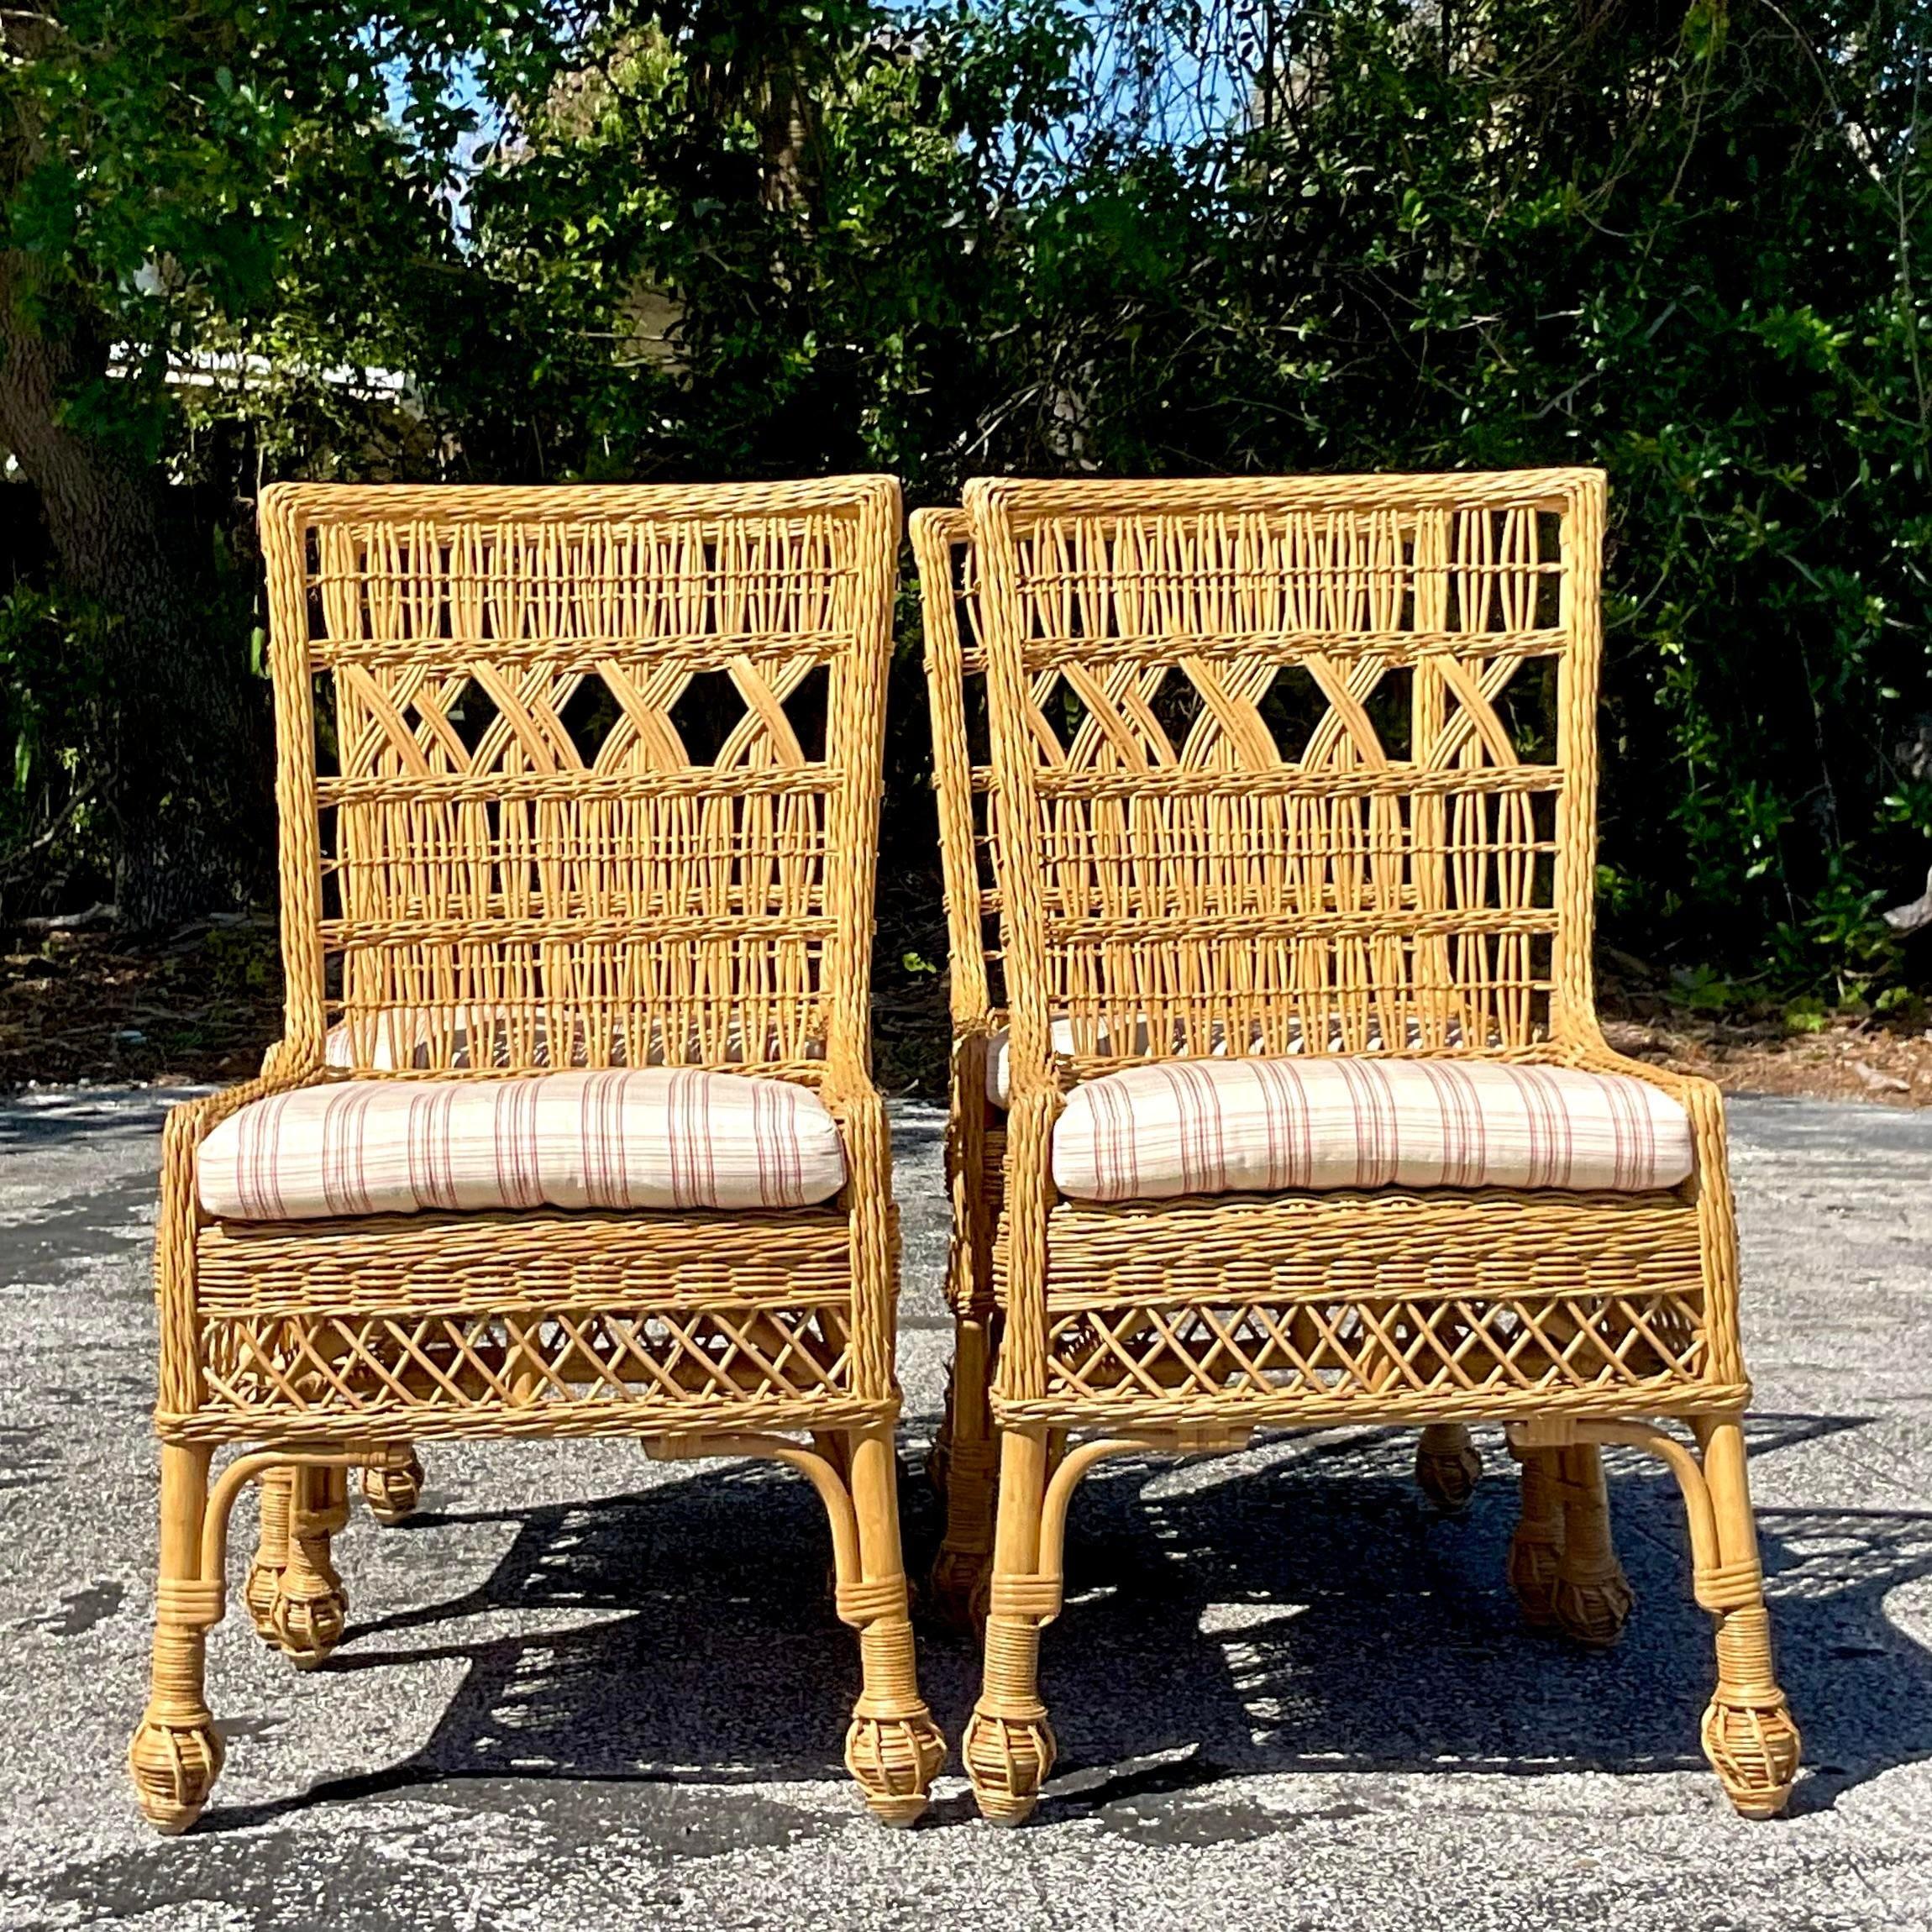 Elevate your dining experience with the Vintage Coastal Woven Rattan Dining Chairs - Set of 4, epitomizing classic American coastal charm. Crafted with meticulous detail, these chairs feature woven rattan seats and backs, offering a perfect blend of